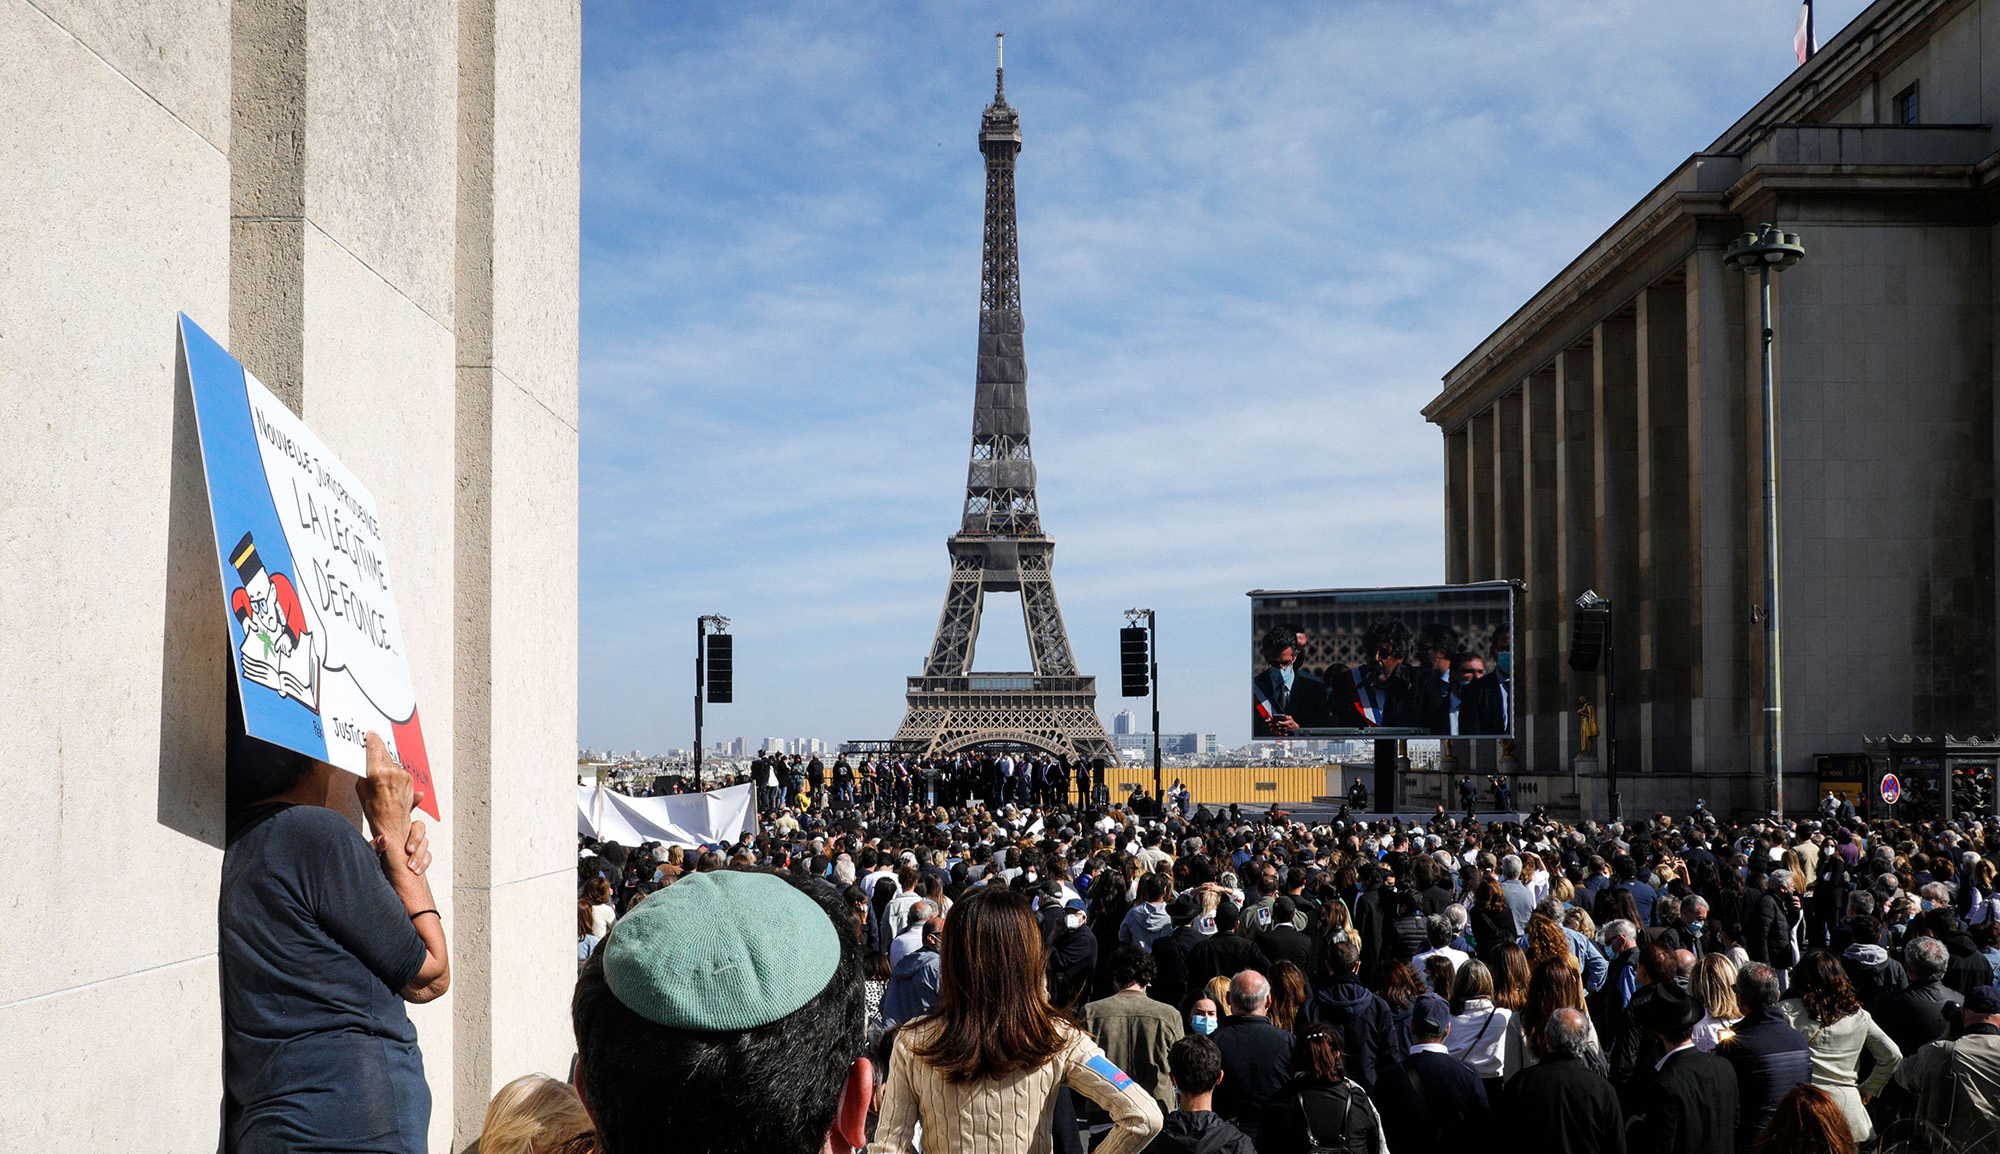 A march for justice for the murdered Orthodox Jewish woman Sarah Halimi in Paris on April 25, 2021. GEOFFROY VAN DER HASSELT/AFP via Getty Images.
